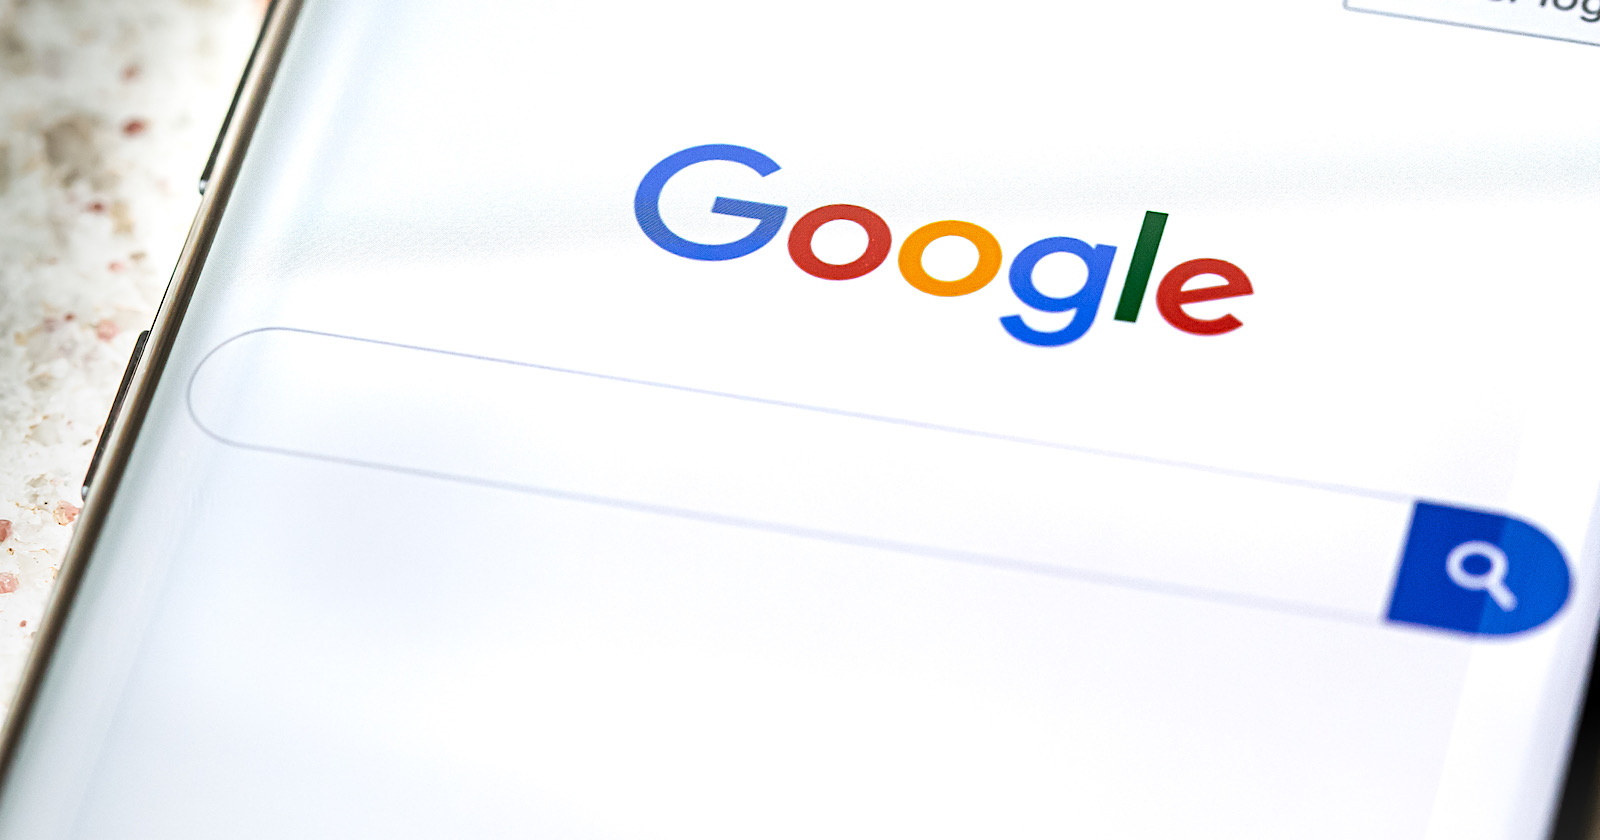 Google Doubles Up on Articles in the Top Stories Carousel